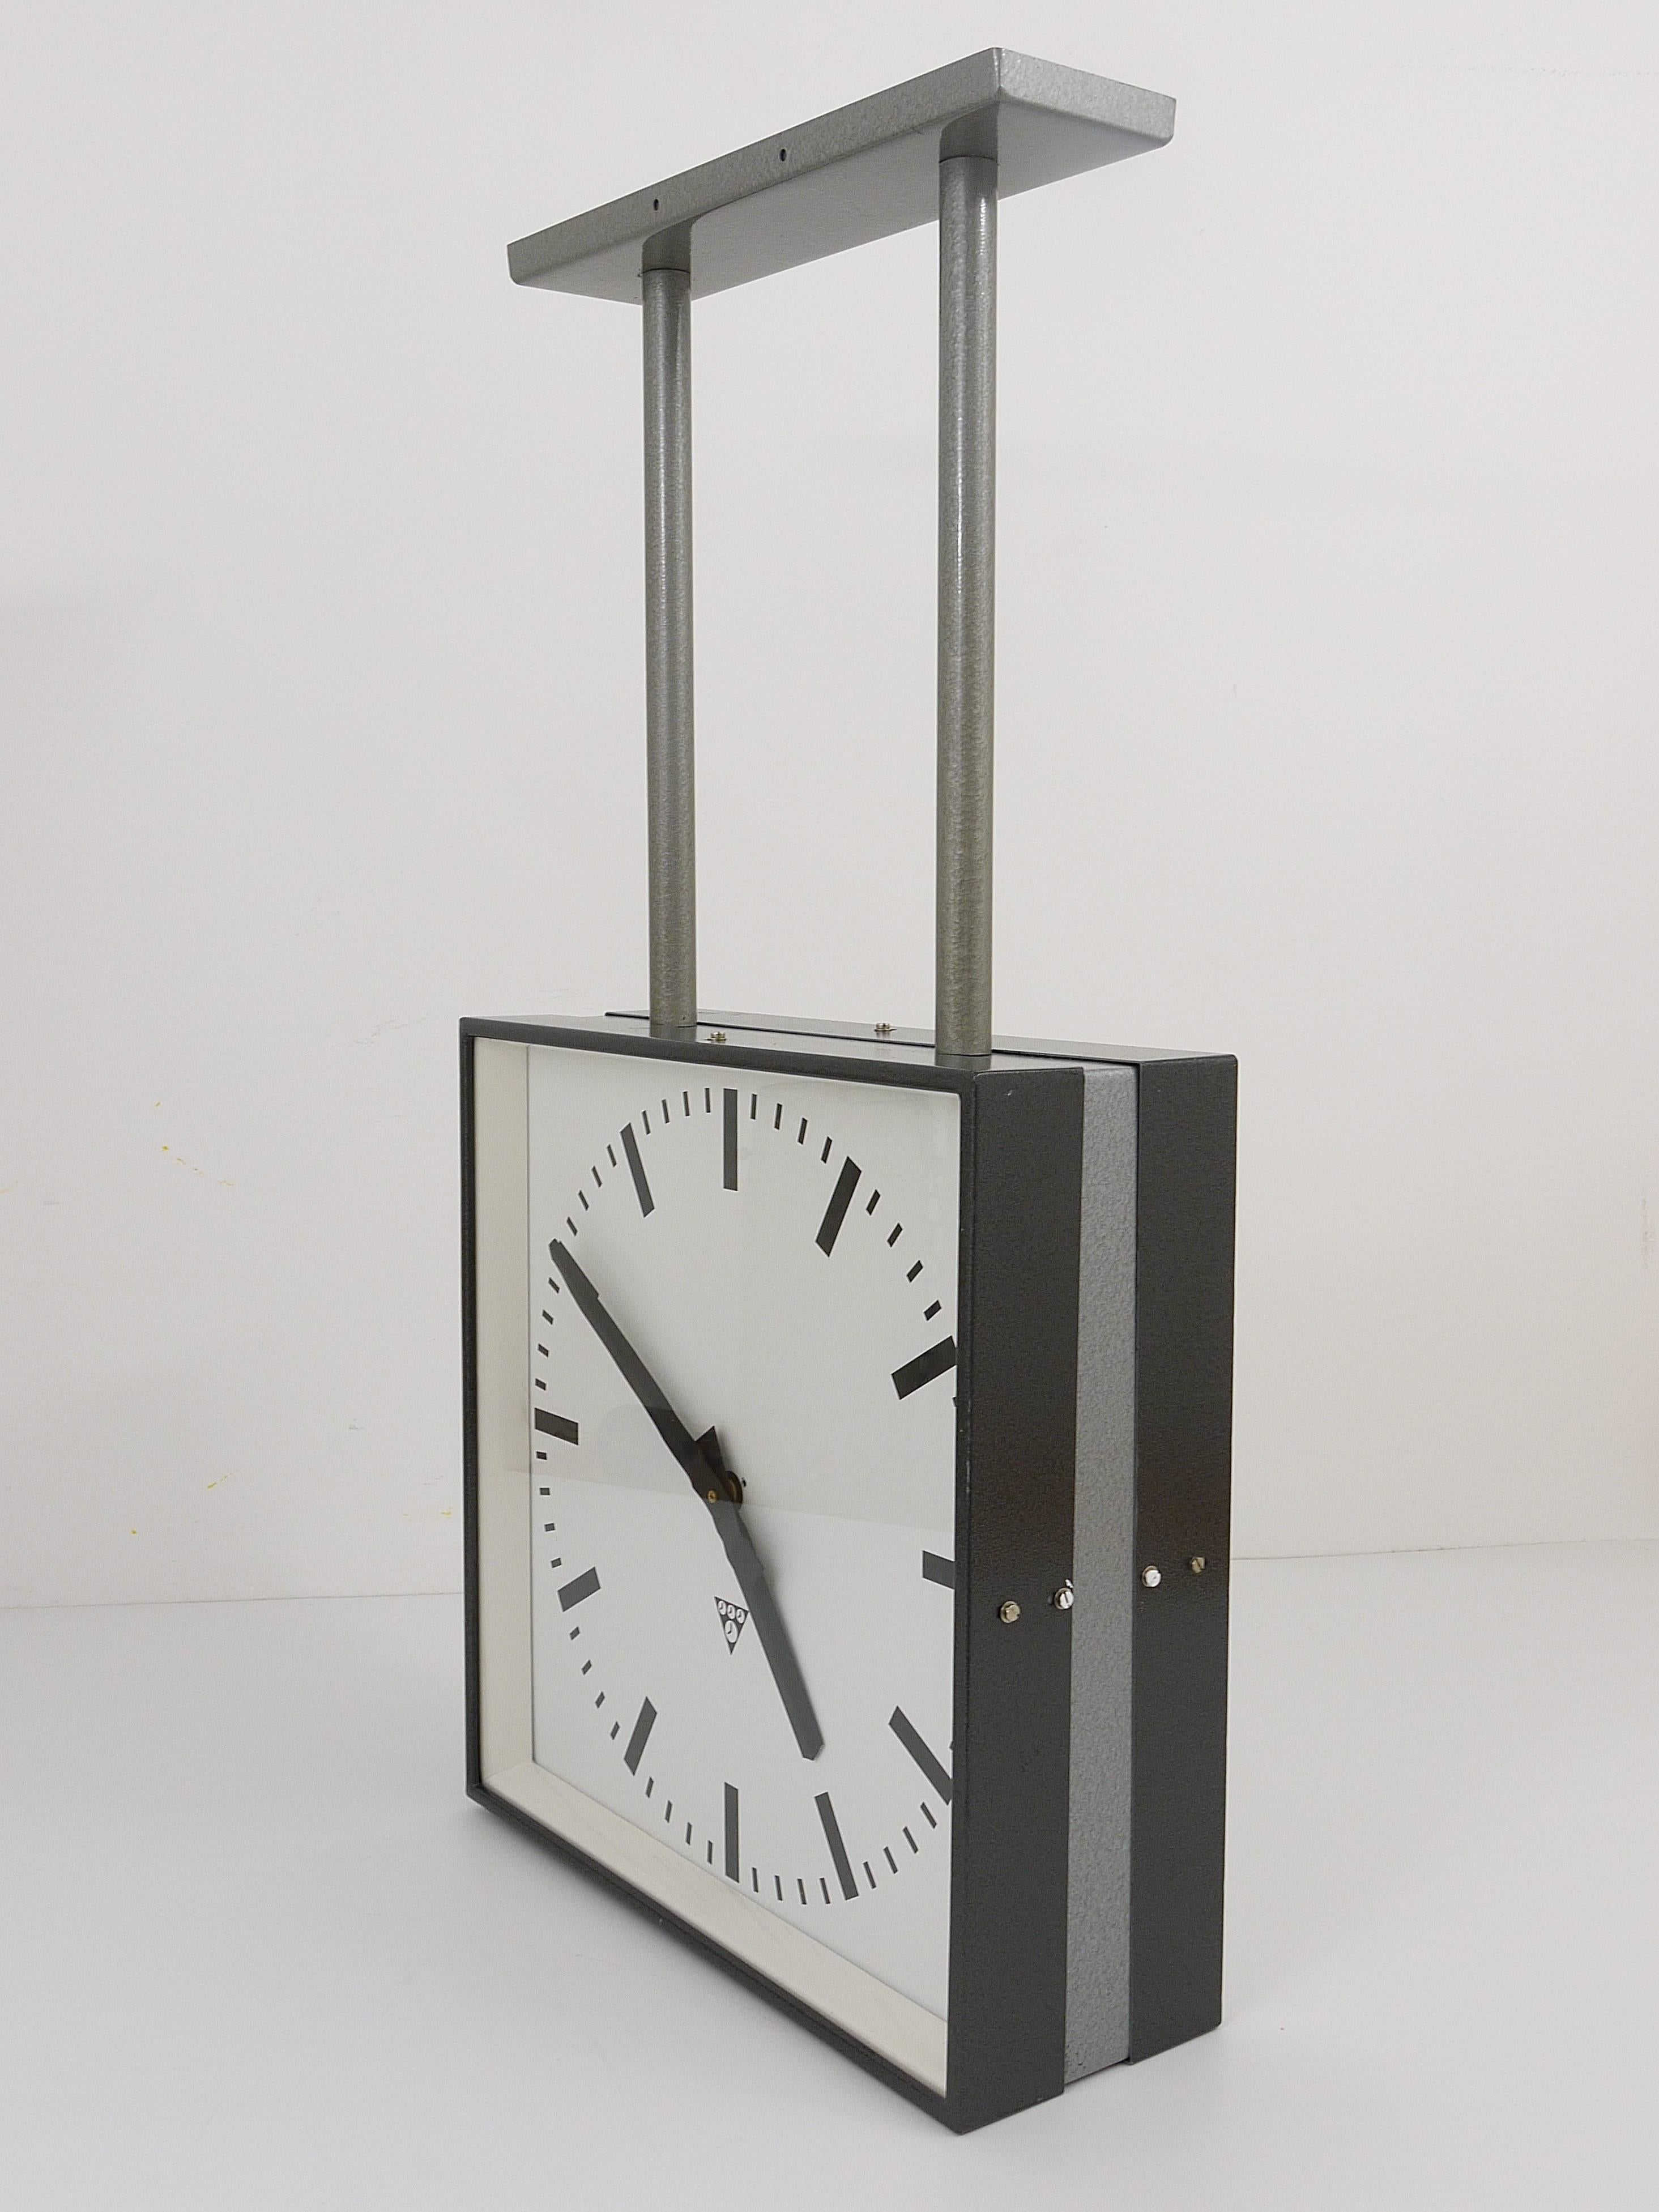 A very big loft Industrial clock from the 1950s, to mount on the ceiling or on the wall. Very straight but beautiful design, this is a double sided clock with two clock faces. The housing is made of grey painted metal. Powered by two quartz